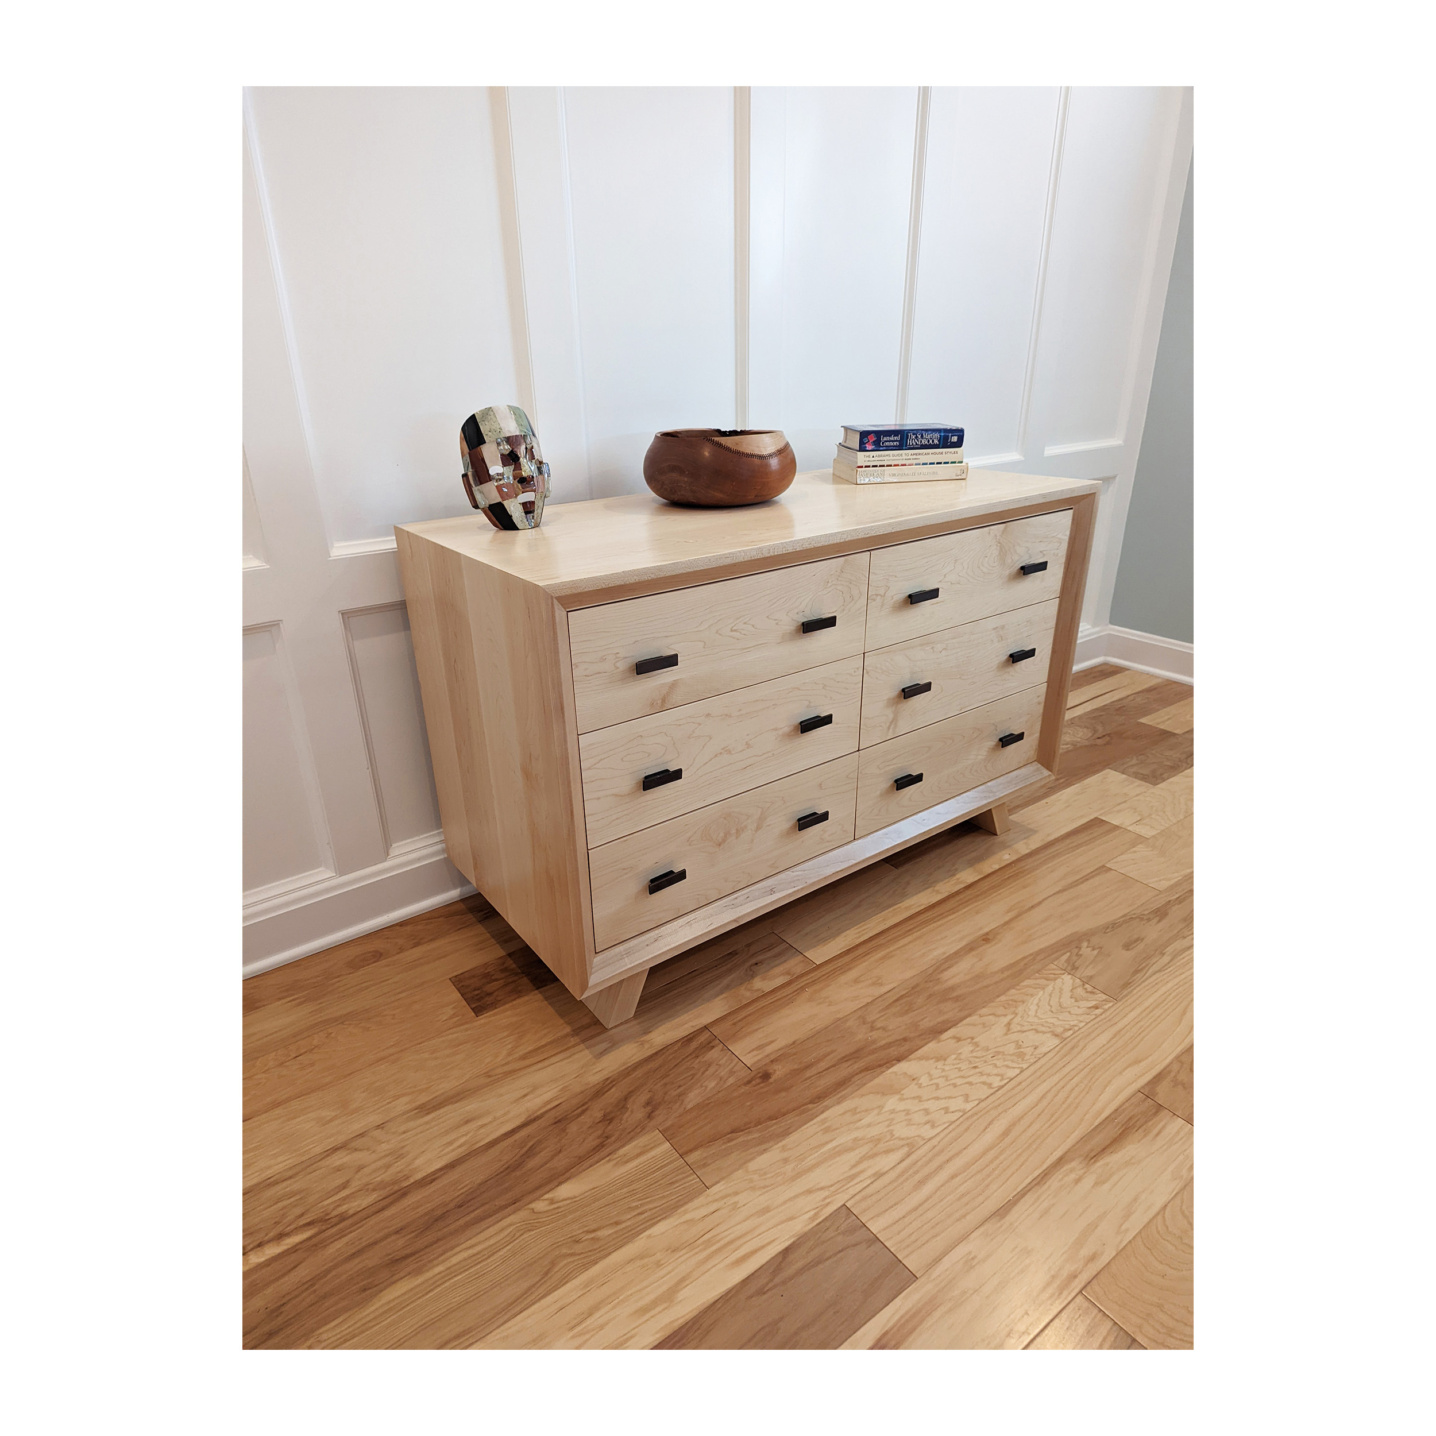 Nordic dresser--Made by 57NorthPlank Tailored Fine Furniture